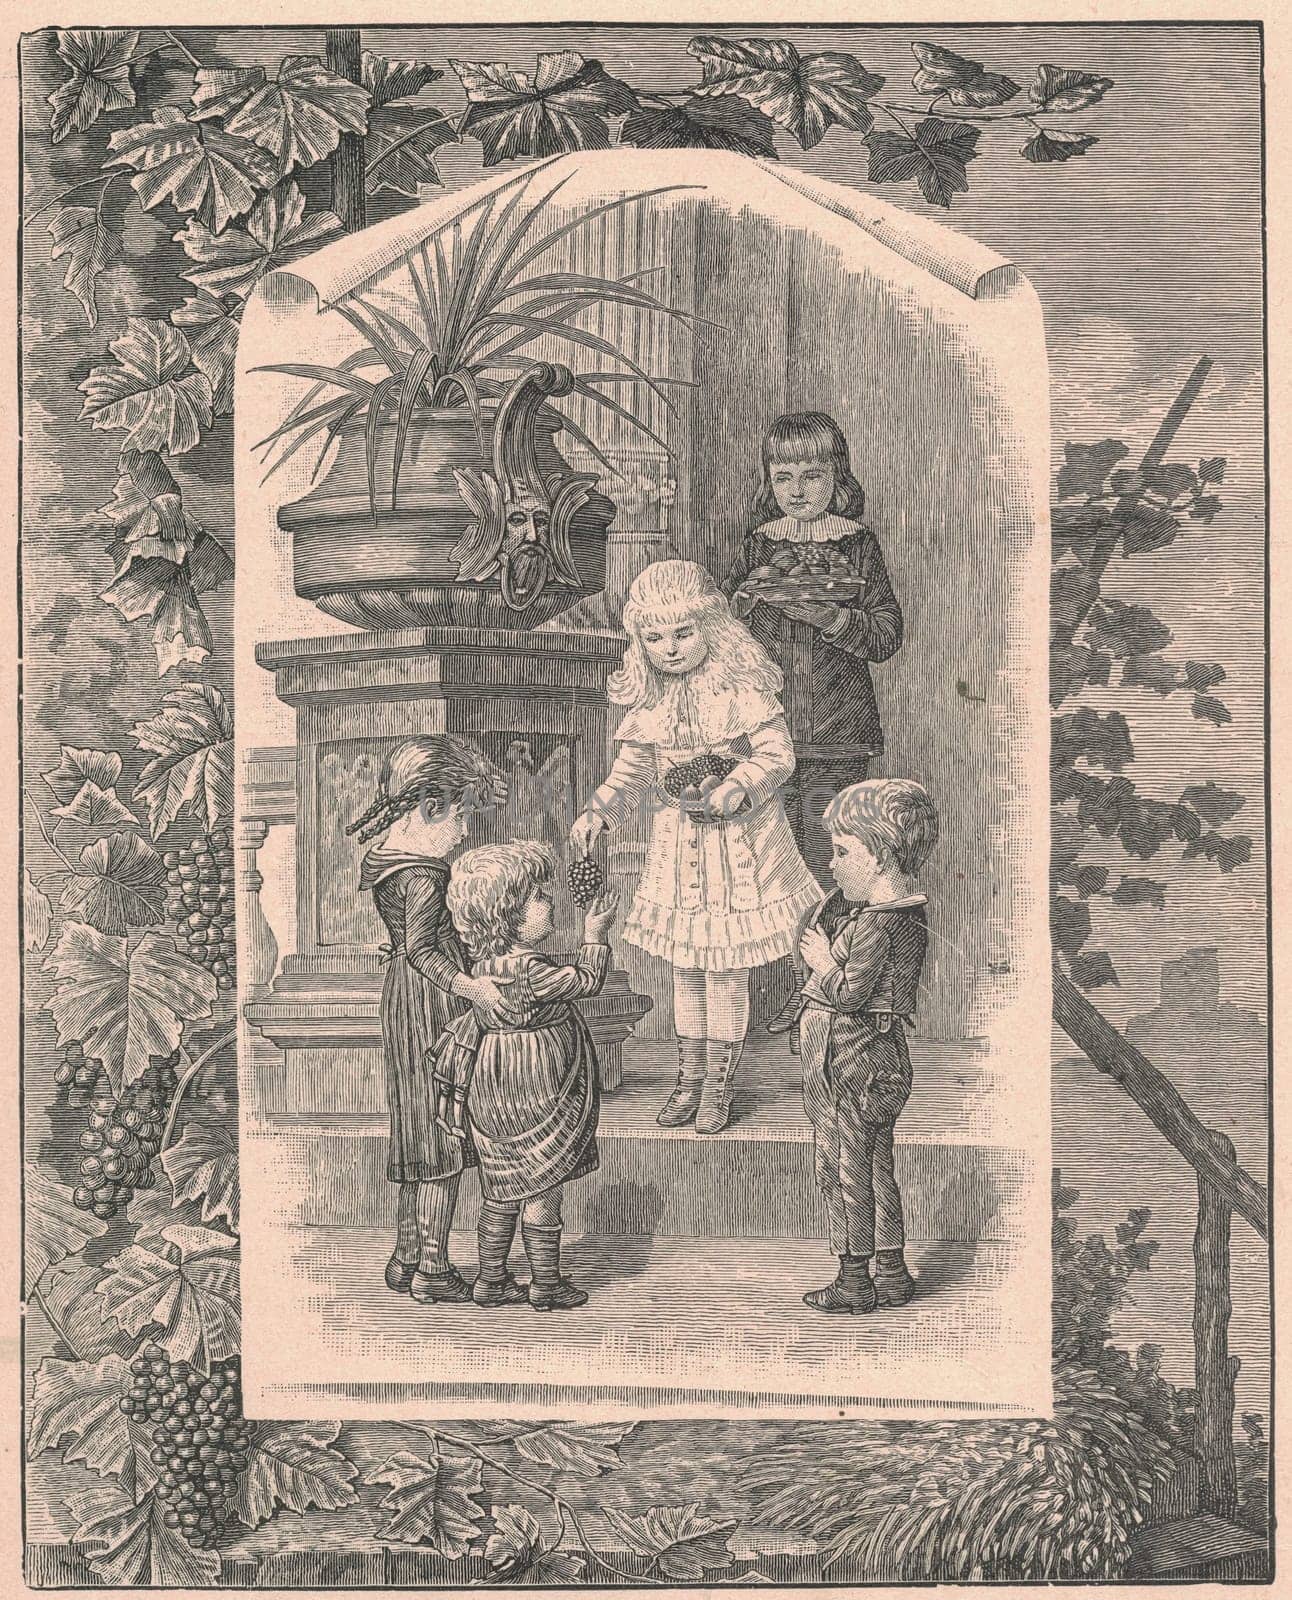 Black and white antique illustration shows a beautiful girl gives the grapes a little girl. Vintage drawing shows the group of children hold the grapes. Old picture from fairy tale book. Storybook illustration published 1910. A fairy tale, fairytale, wonder tale, magic tale, fairy story or Marchen is an instance of folklore genre that takes the form of a short story. Such stories typically feature mythical entities such as dwarfs, dragons, elves, fairies and Peris, giants, Divs, gnomes, goblins, griffins, mermaids, talking animals, trolls, unicorns, or witches, and usually magic or enchantments.